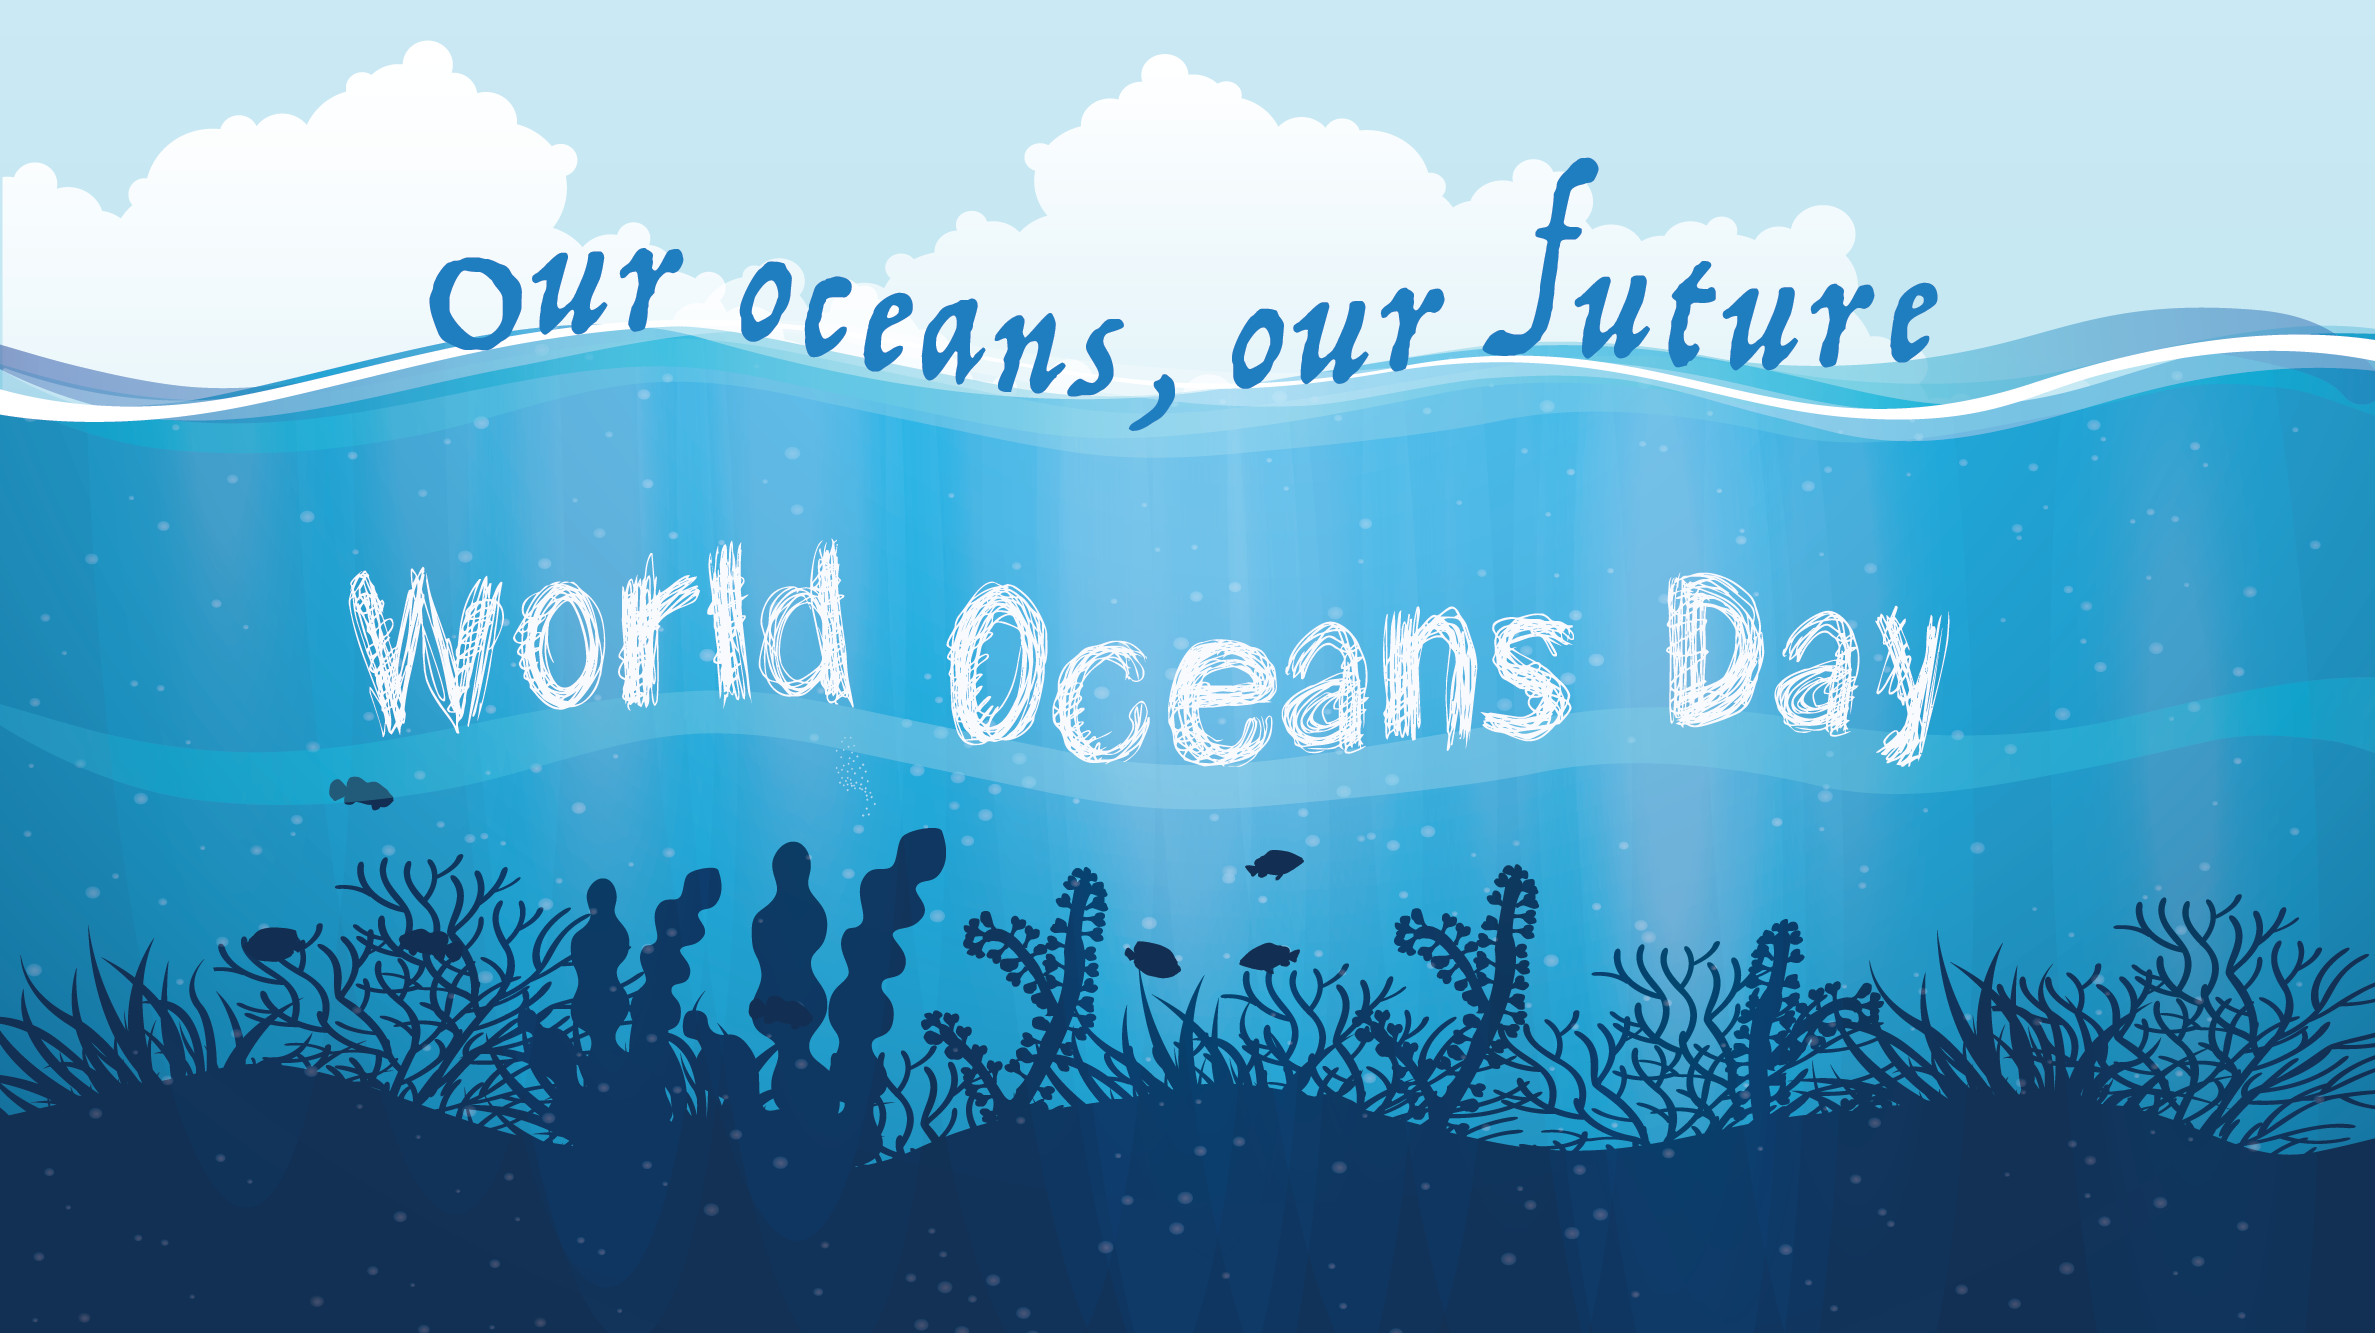 World Oceans Day: Protecting Our Oceans, Our Future with Nuclear ...